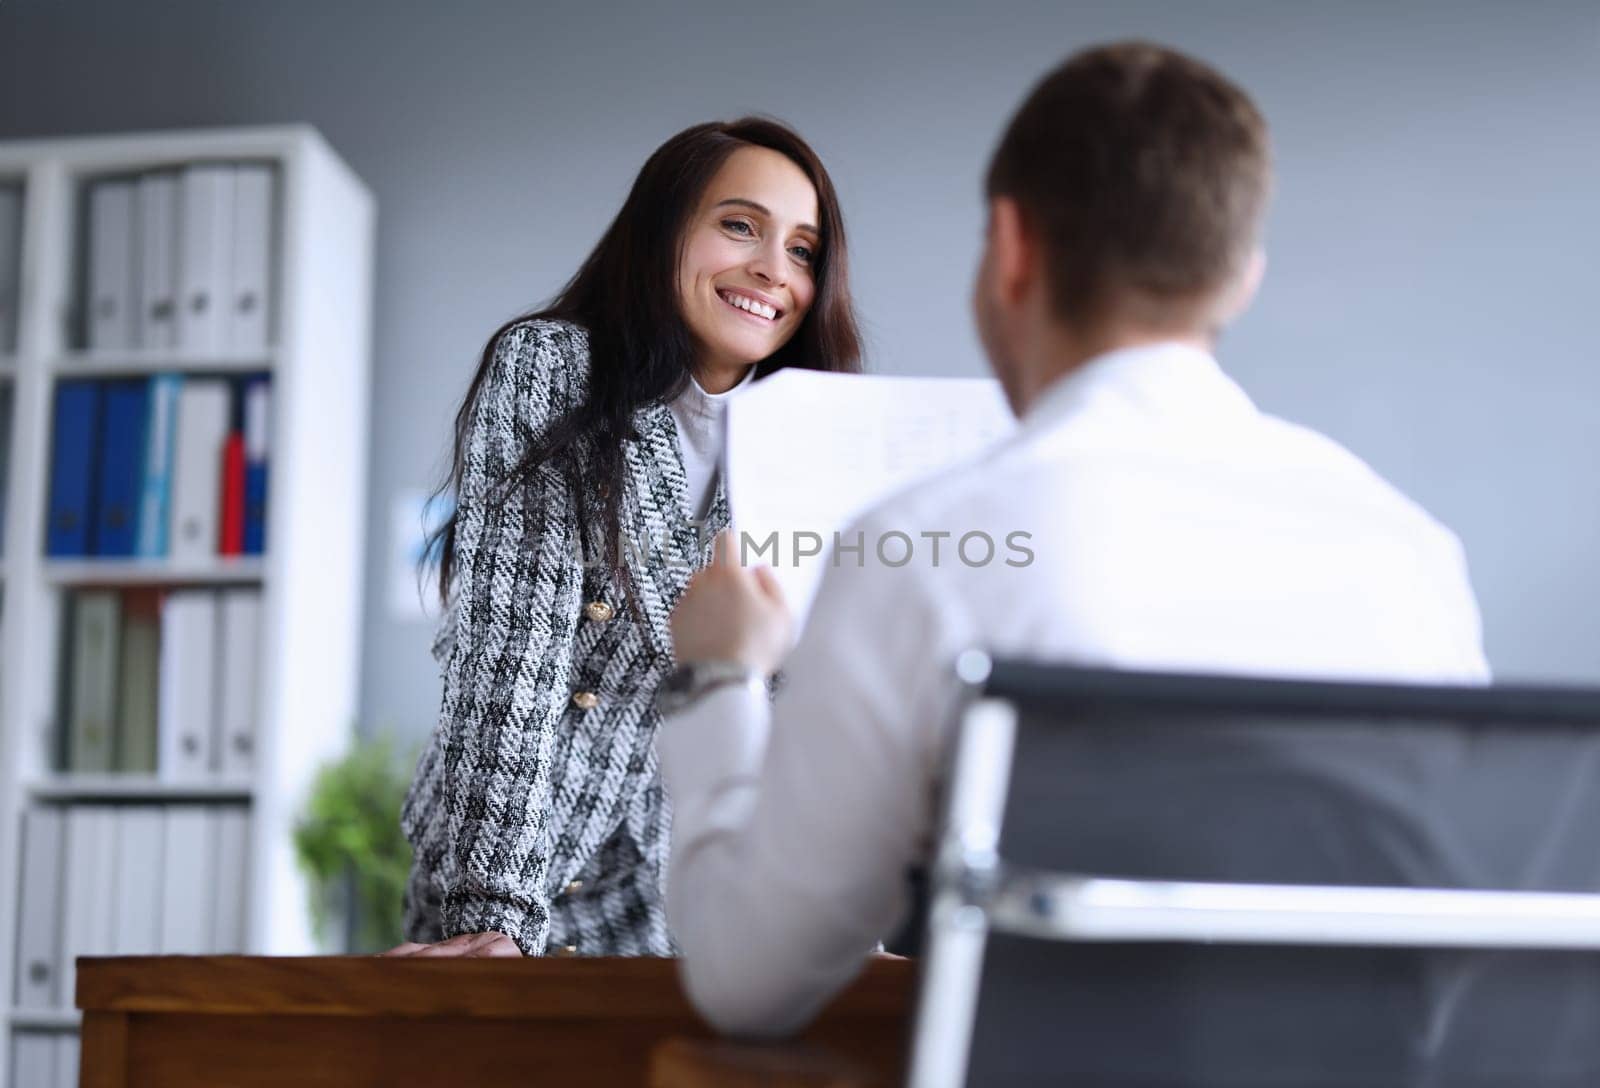 Portrait of cheerful smart businesswoman listening co-workers monthly report. Smiling female in presentable suit in company office. Finance and economy concept